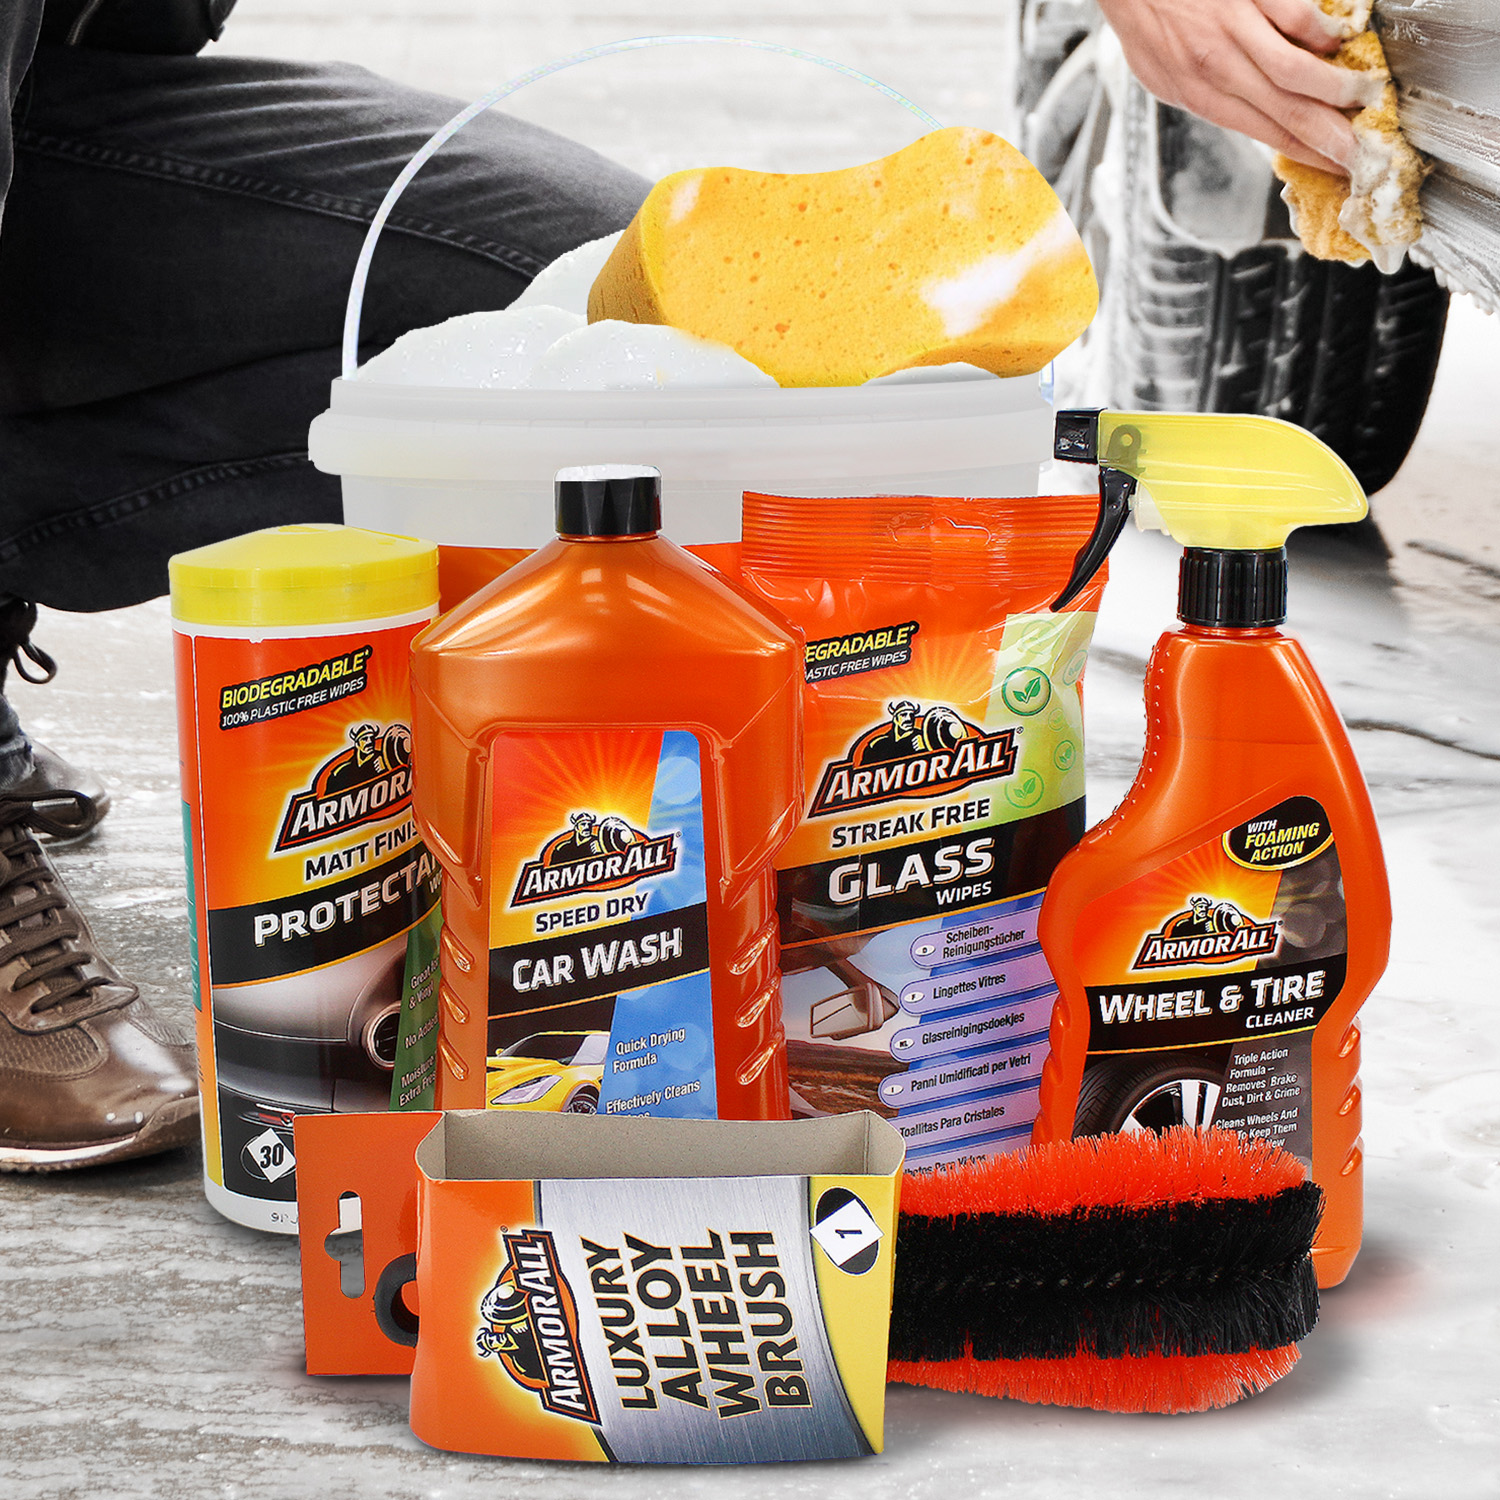 ArmorAll 7 Piece Car Cleaning Kit for Interior and Exterior -  WeeklyDeals4Less